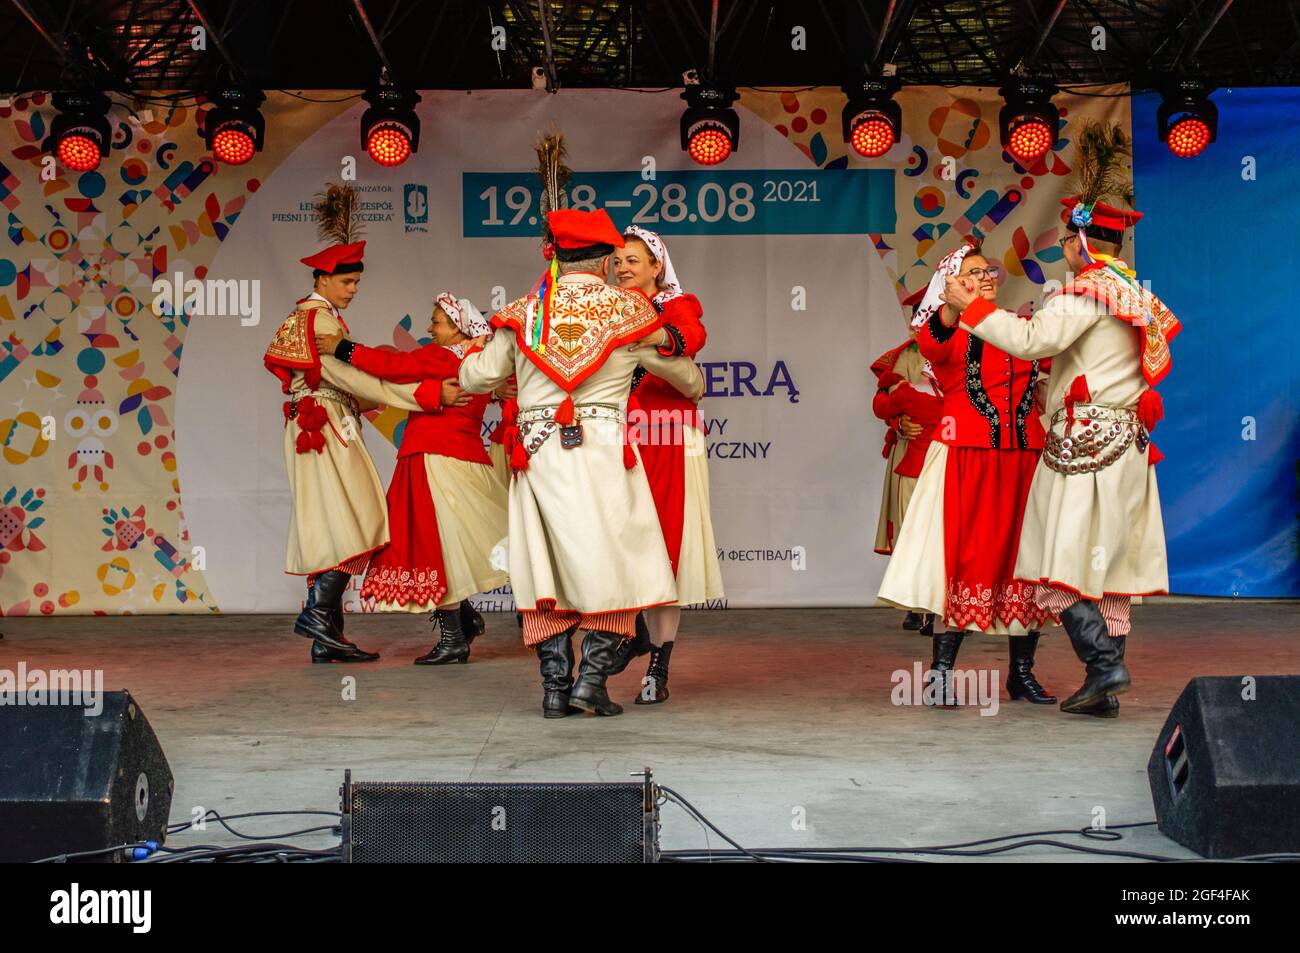 Polkowice, Poland August 21, 2021, 24th International Folklore Festival, World Under Kyczera,dancers from Poland on stage, for editorial use only Stock Photo